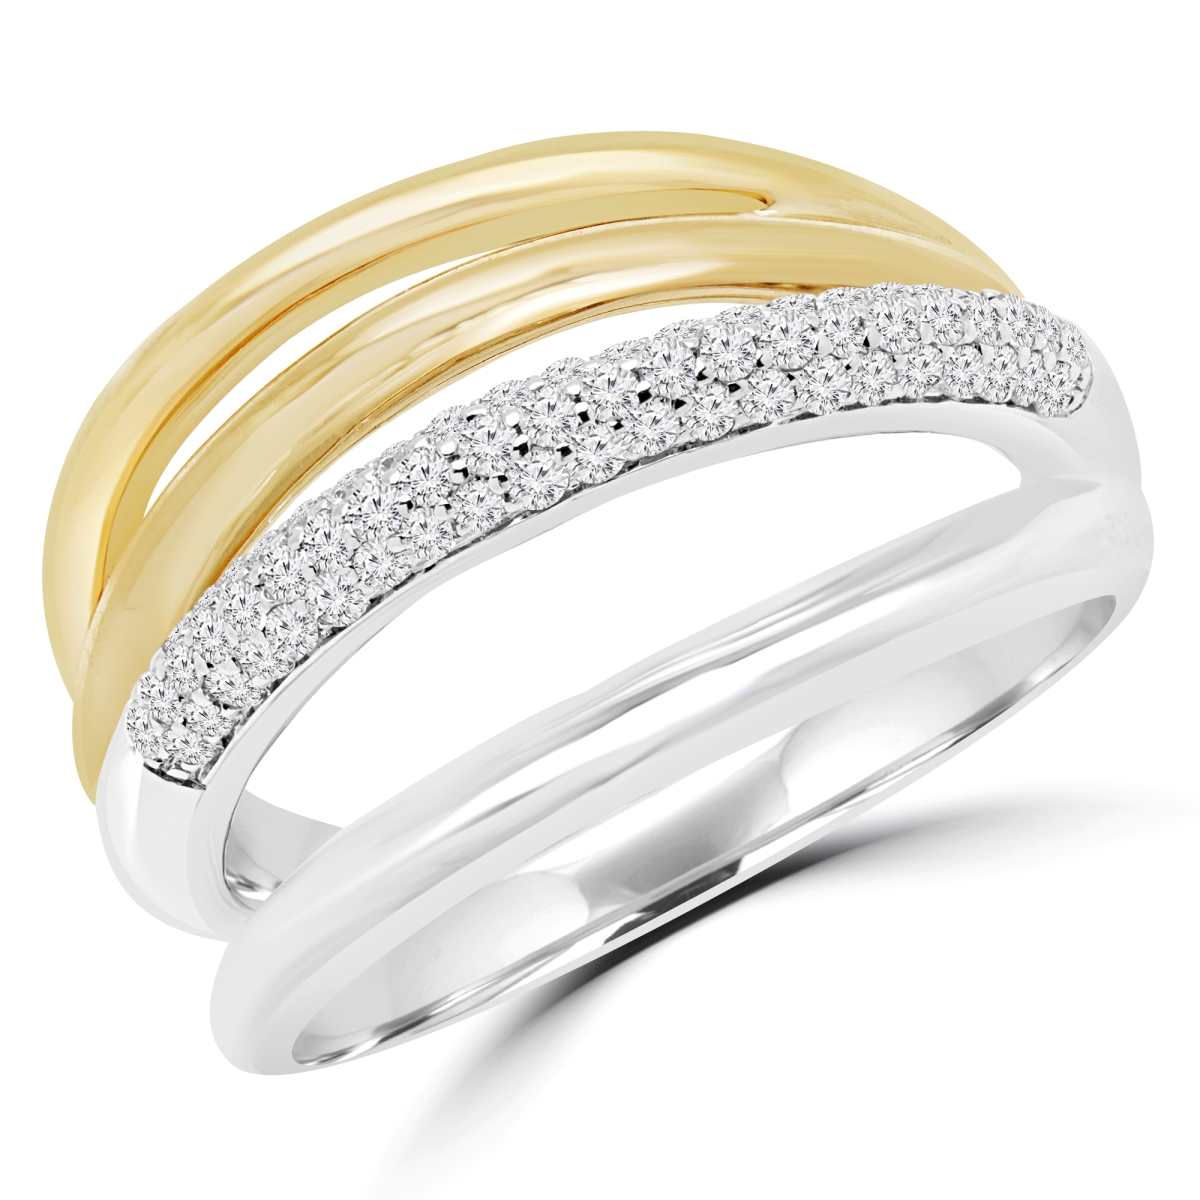 Picture of Majesty Diamonds MDR170050-6.25 0.37 CTW Round Diamond Cocktail Semi-Eternity Ring in 14K Two-Tone Gold - 6.25